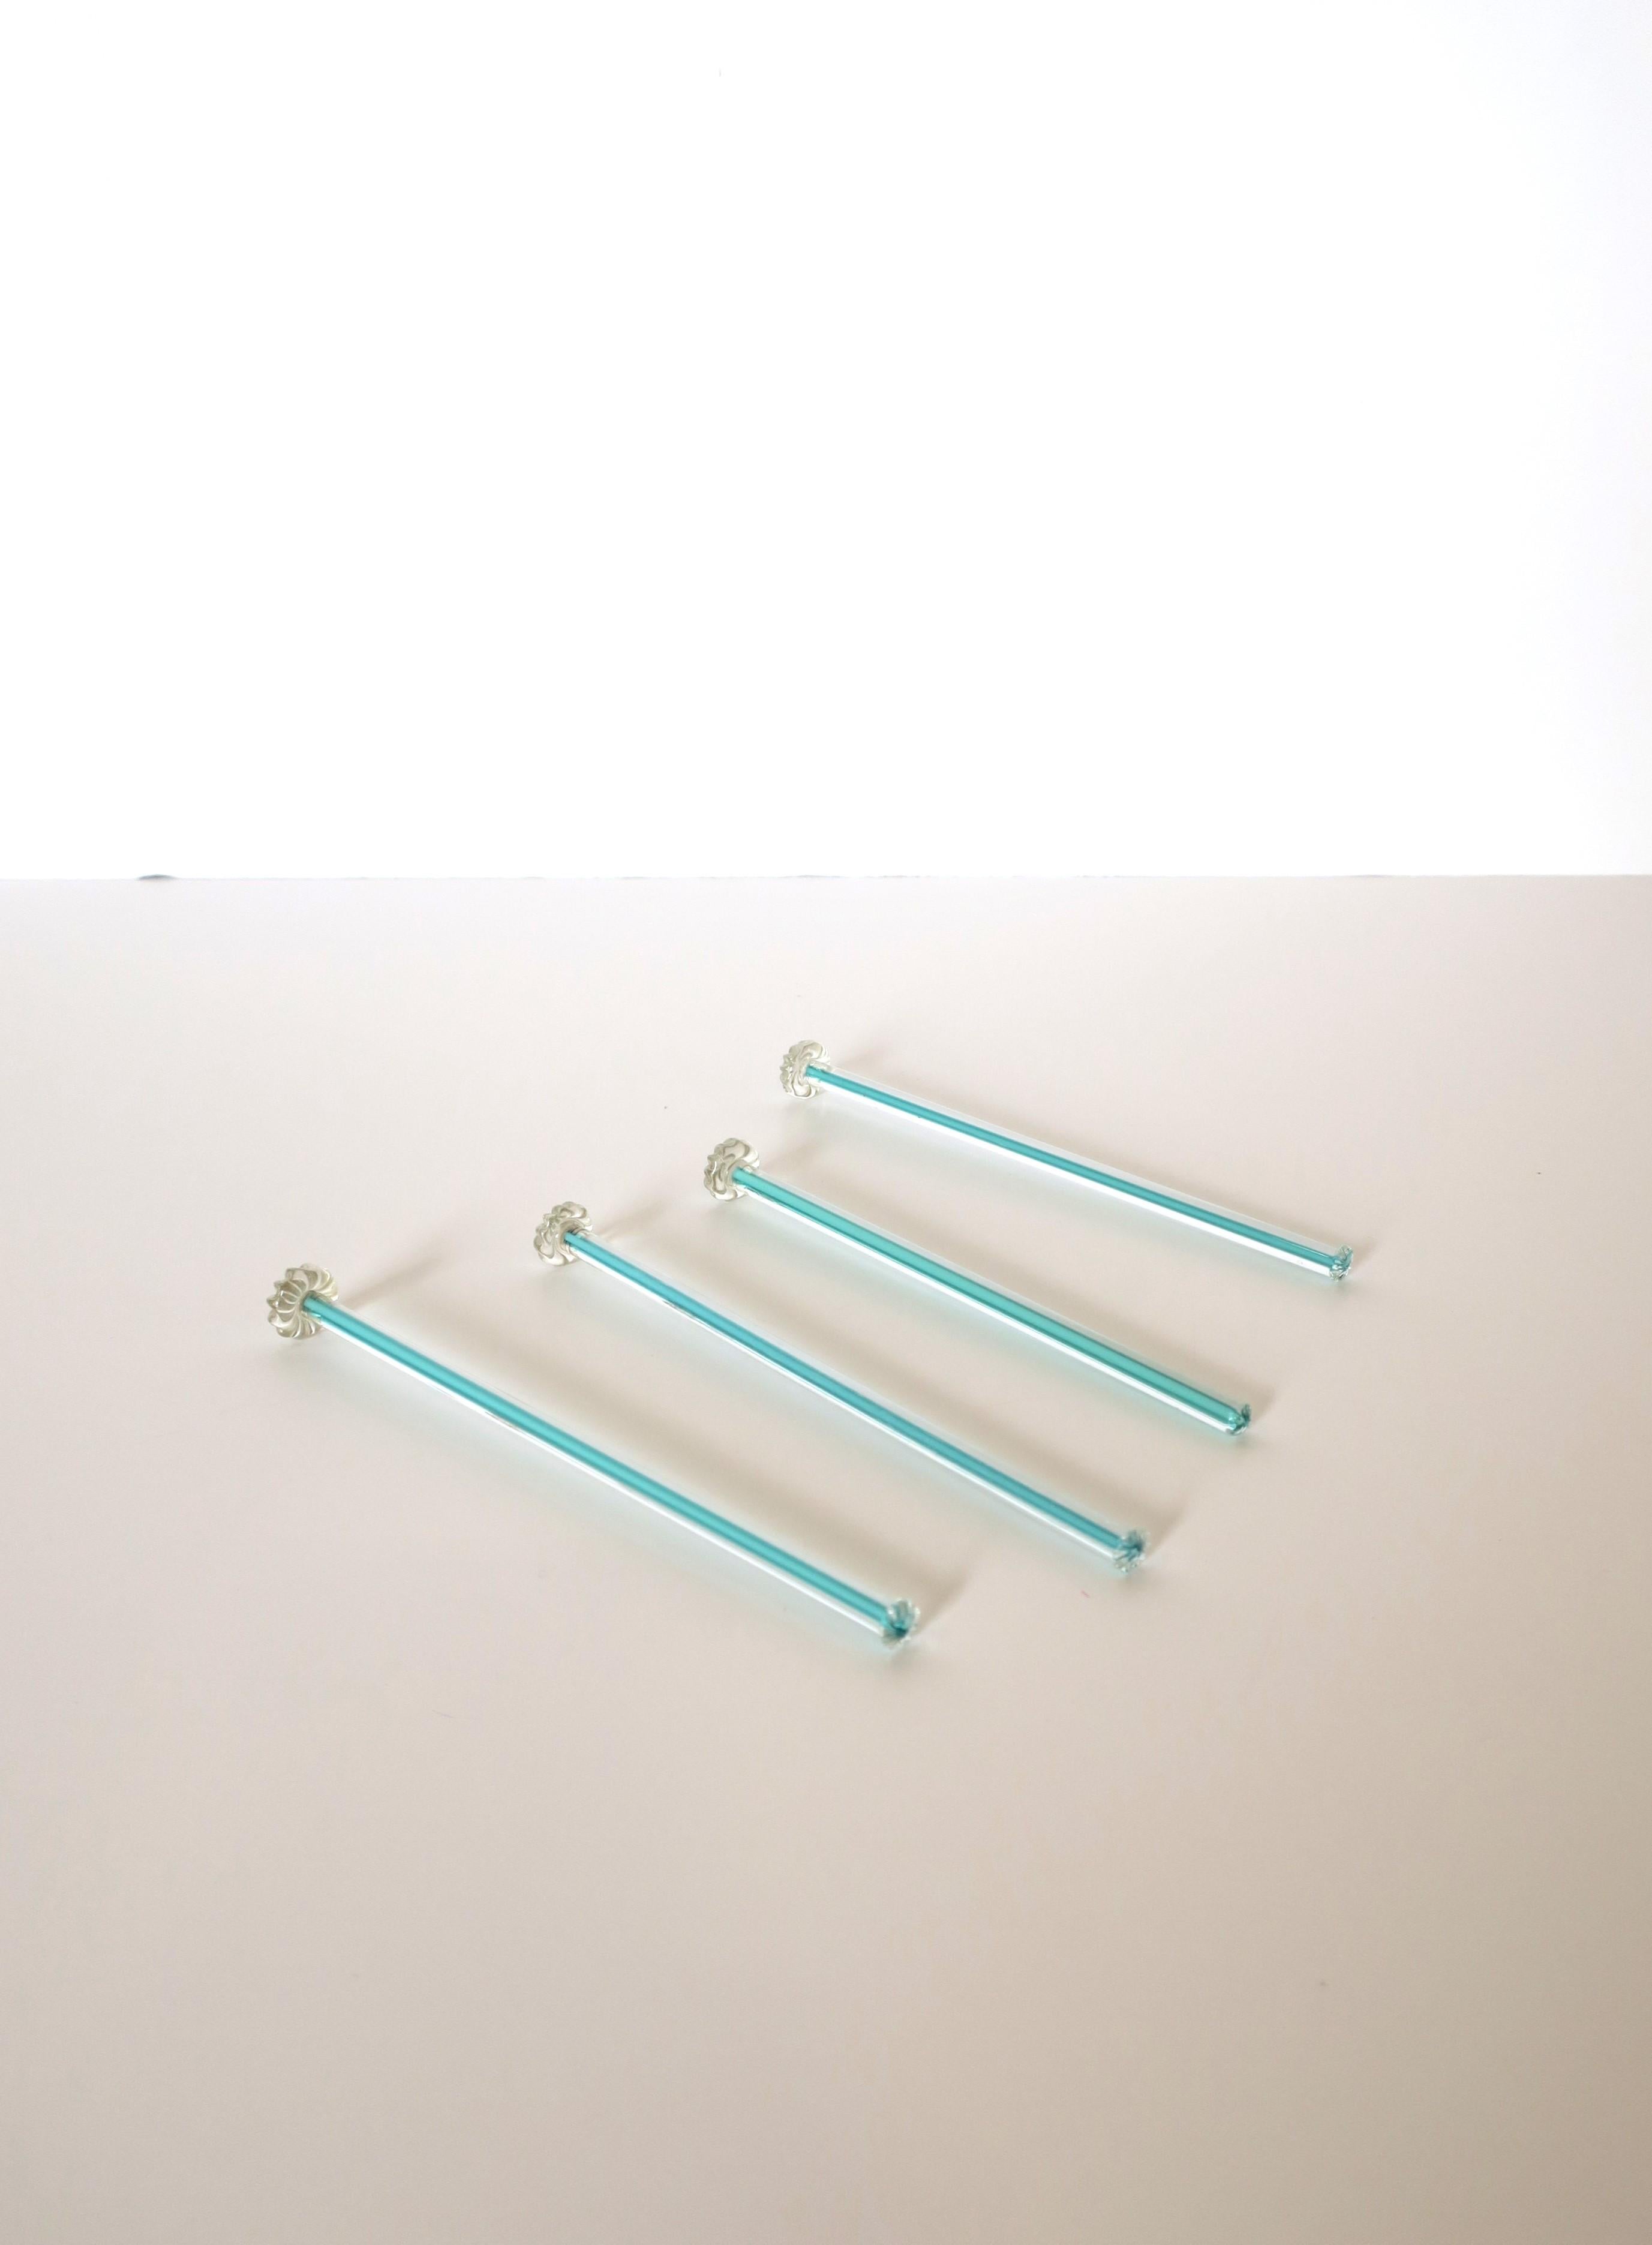 Vintage Italian Murano Art Glass Cocktail Stirrers, Set of 4 In Good Condition For Sale In New York, NY